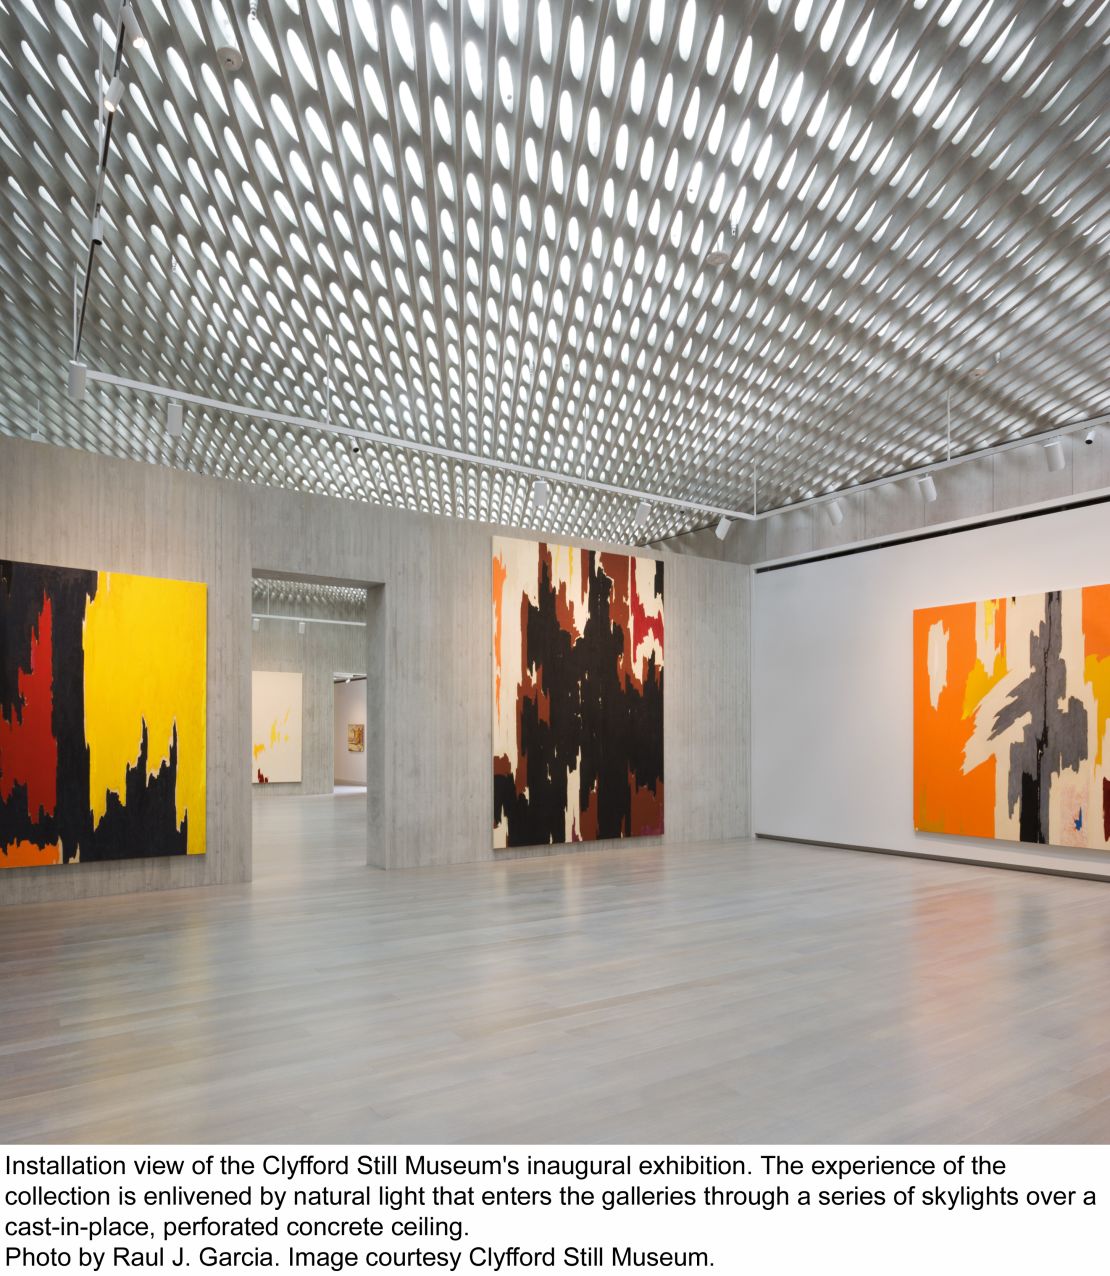 The Clyfford Still Museum opened in Denver last fall after selling four of Still's paintings to help finance construction. 